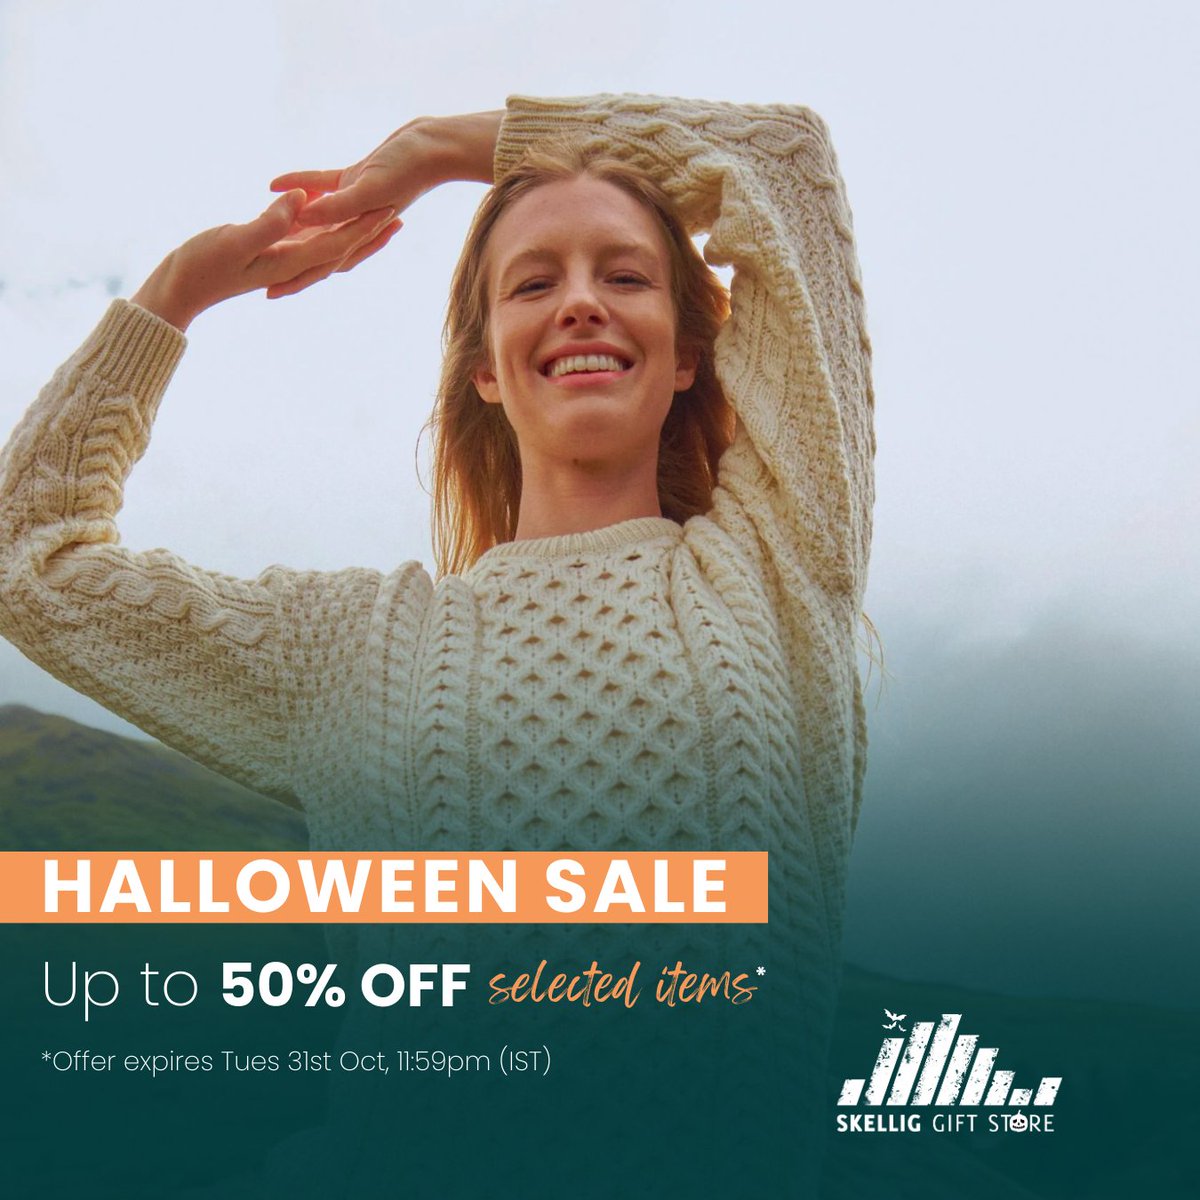 Browse over 300 stunning women's sweaters on Skellig Gift Store during our Halloween sale for some excellent bargains on some beautiful craft aran sweaters 😍

#IrishGifts #WomensSweaters #IrishSweaters #AranSweaters